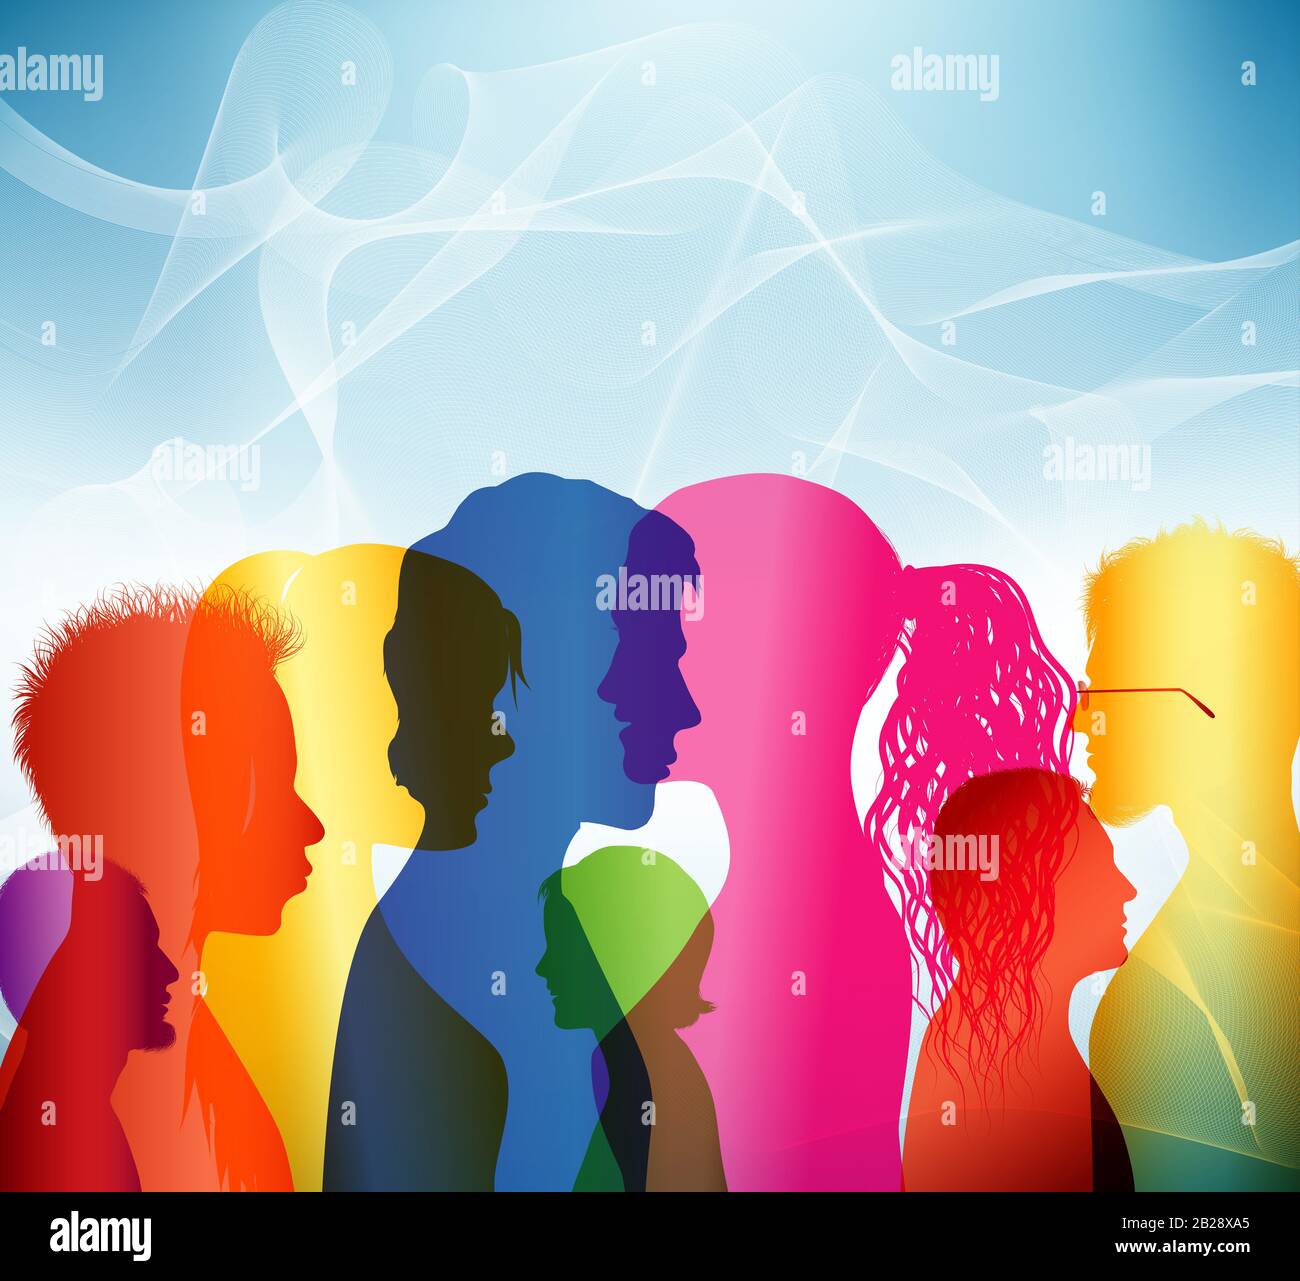 Crowd. Communication diversity people. Group of multiethnic people. Colored shilouette profiles. Community. Sharing idea. Social network. Communicate Stock Photo